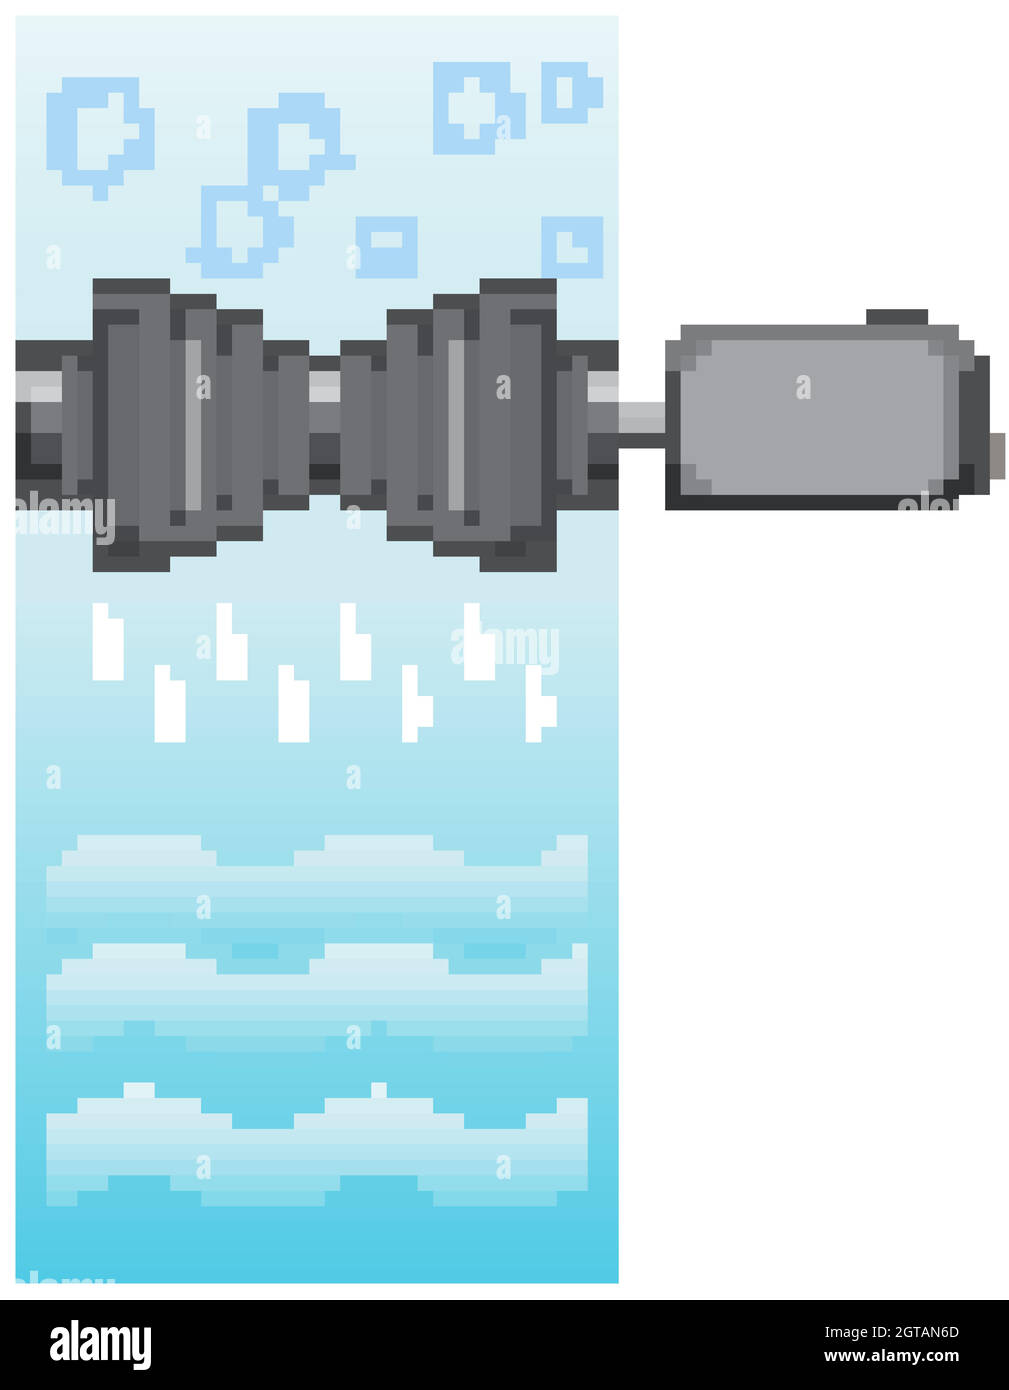 Diagram showing water pump system Stock Vector